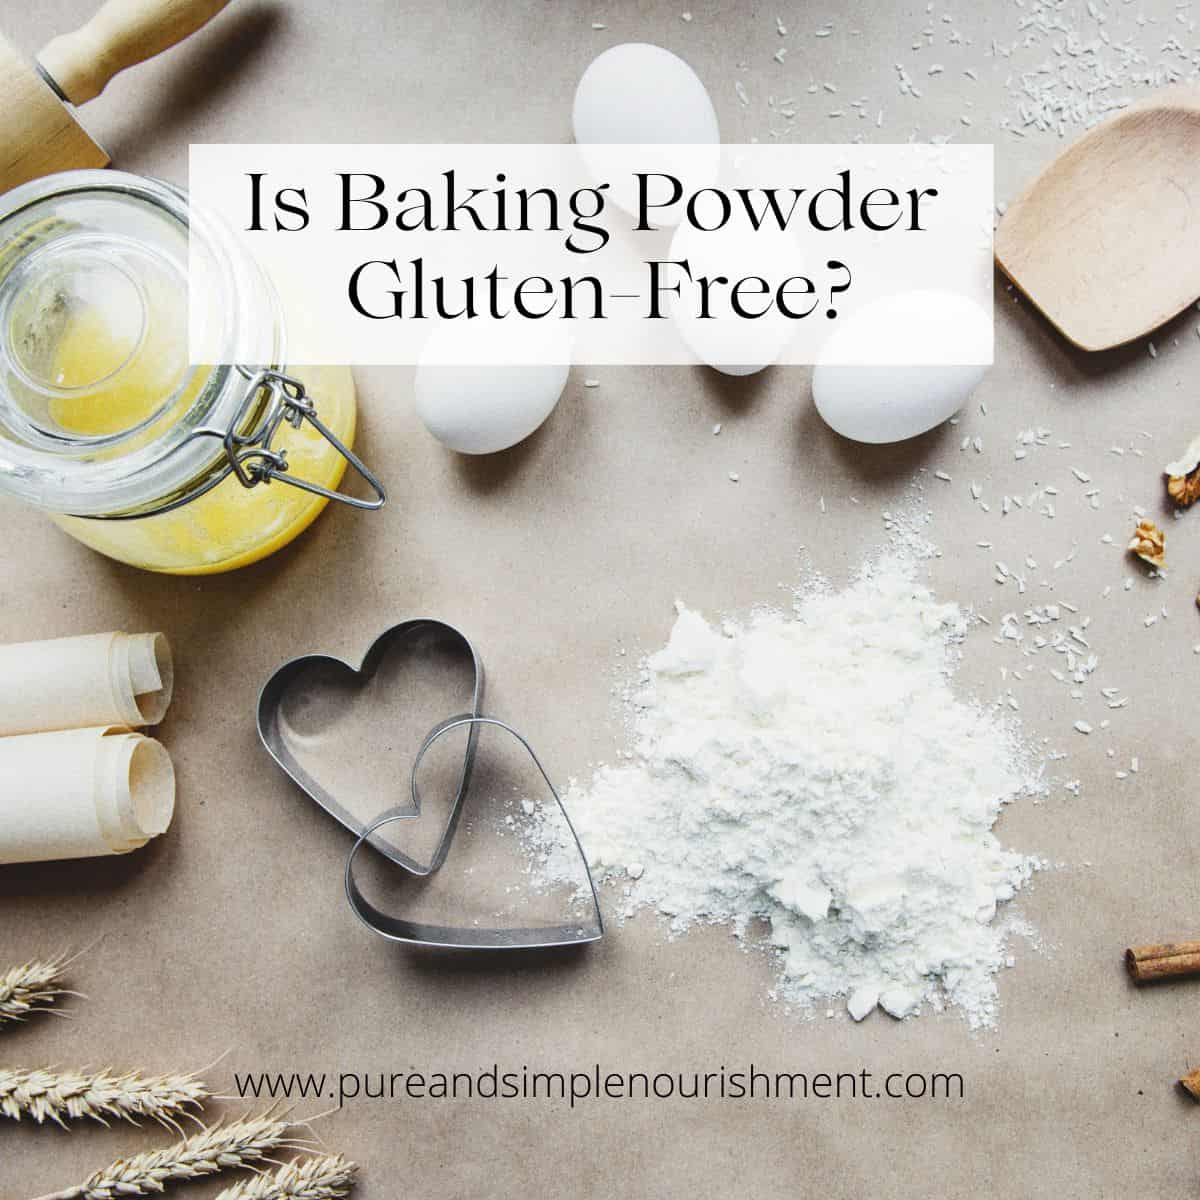 A countertop with baking tools on it including a rolling pin, cookie cutters, eggs, butter and baking powder with the title "is baking powder gluten free?" over them.